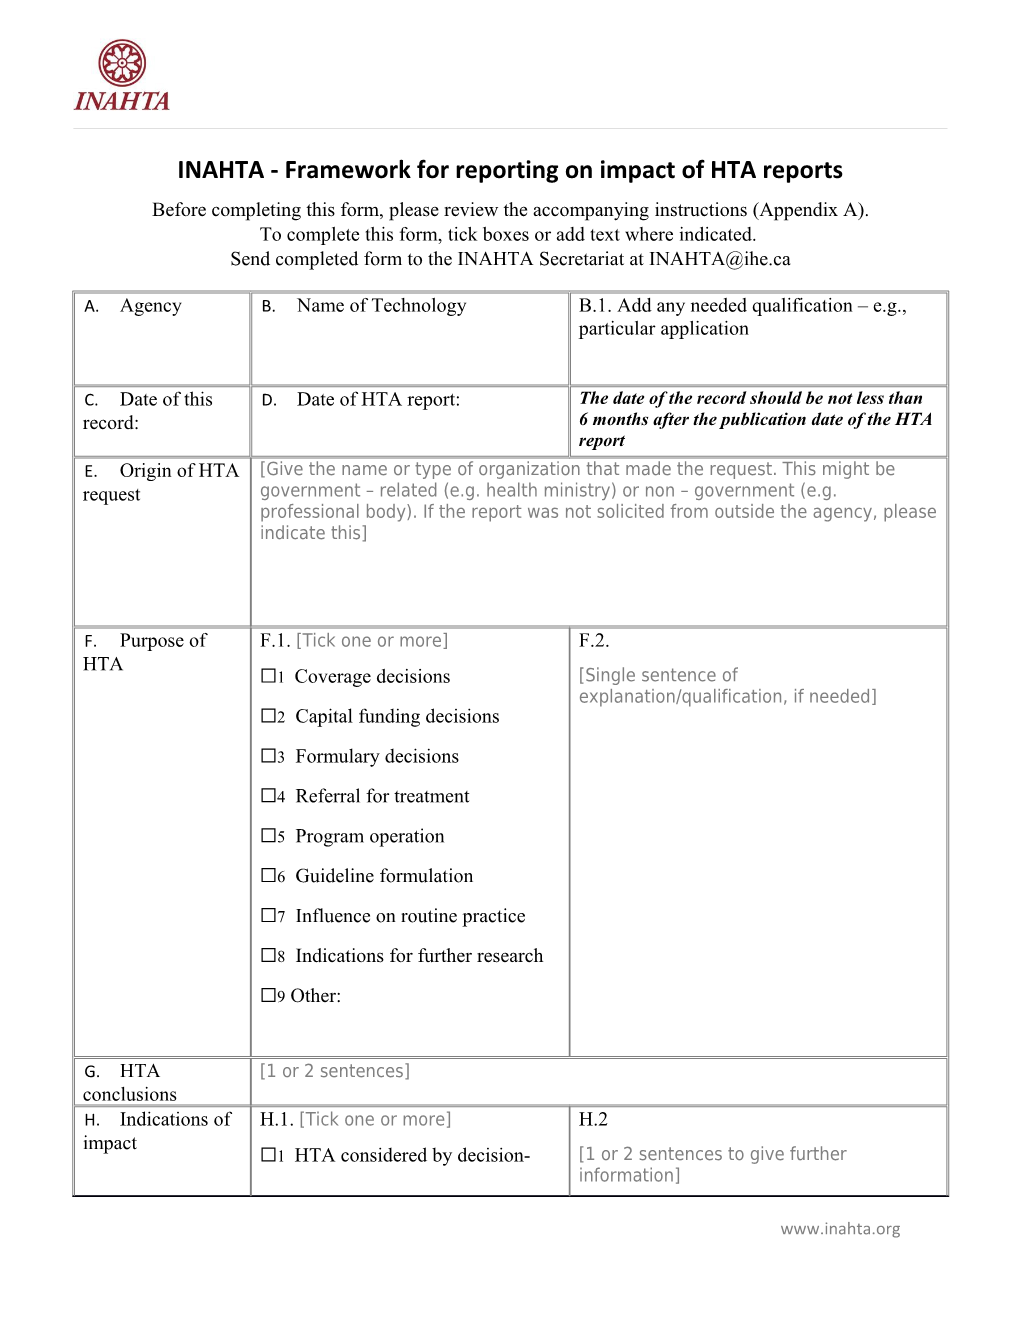 INAHTA - Framework for Reporting on Impact of HTA Reports